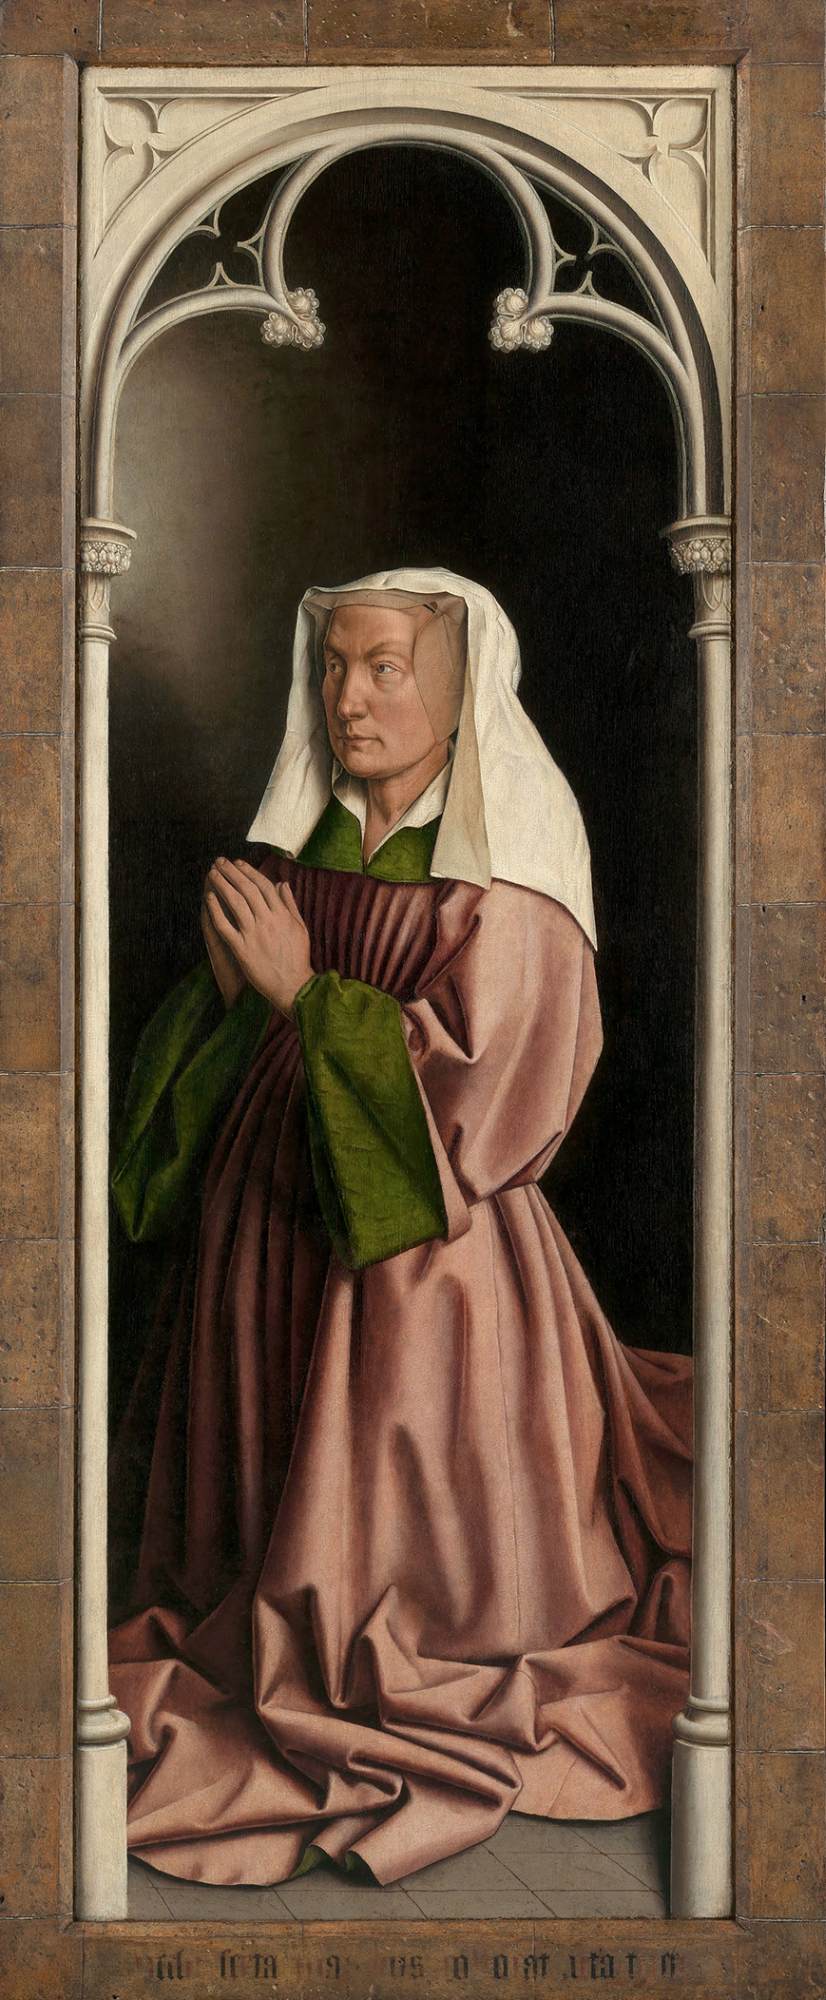 The Ghent Altarpiece: The Donor's Wife